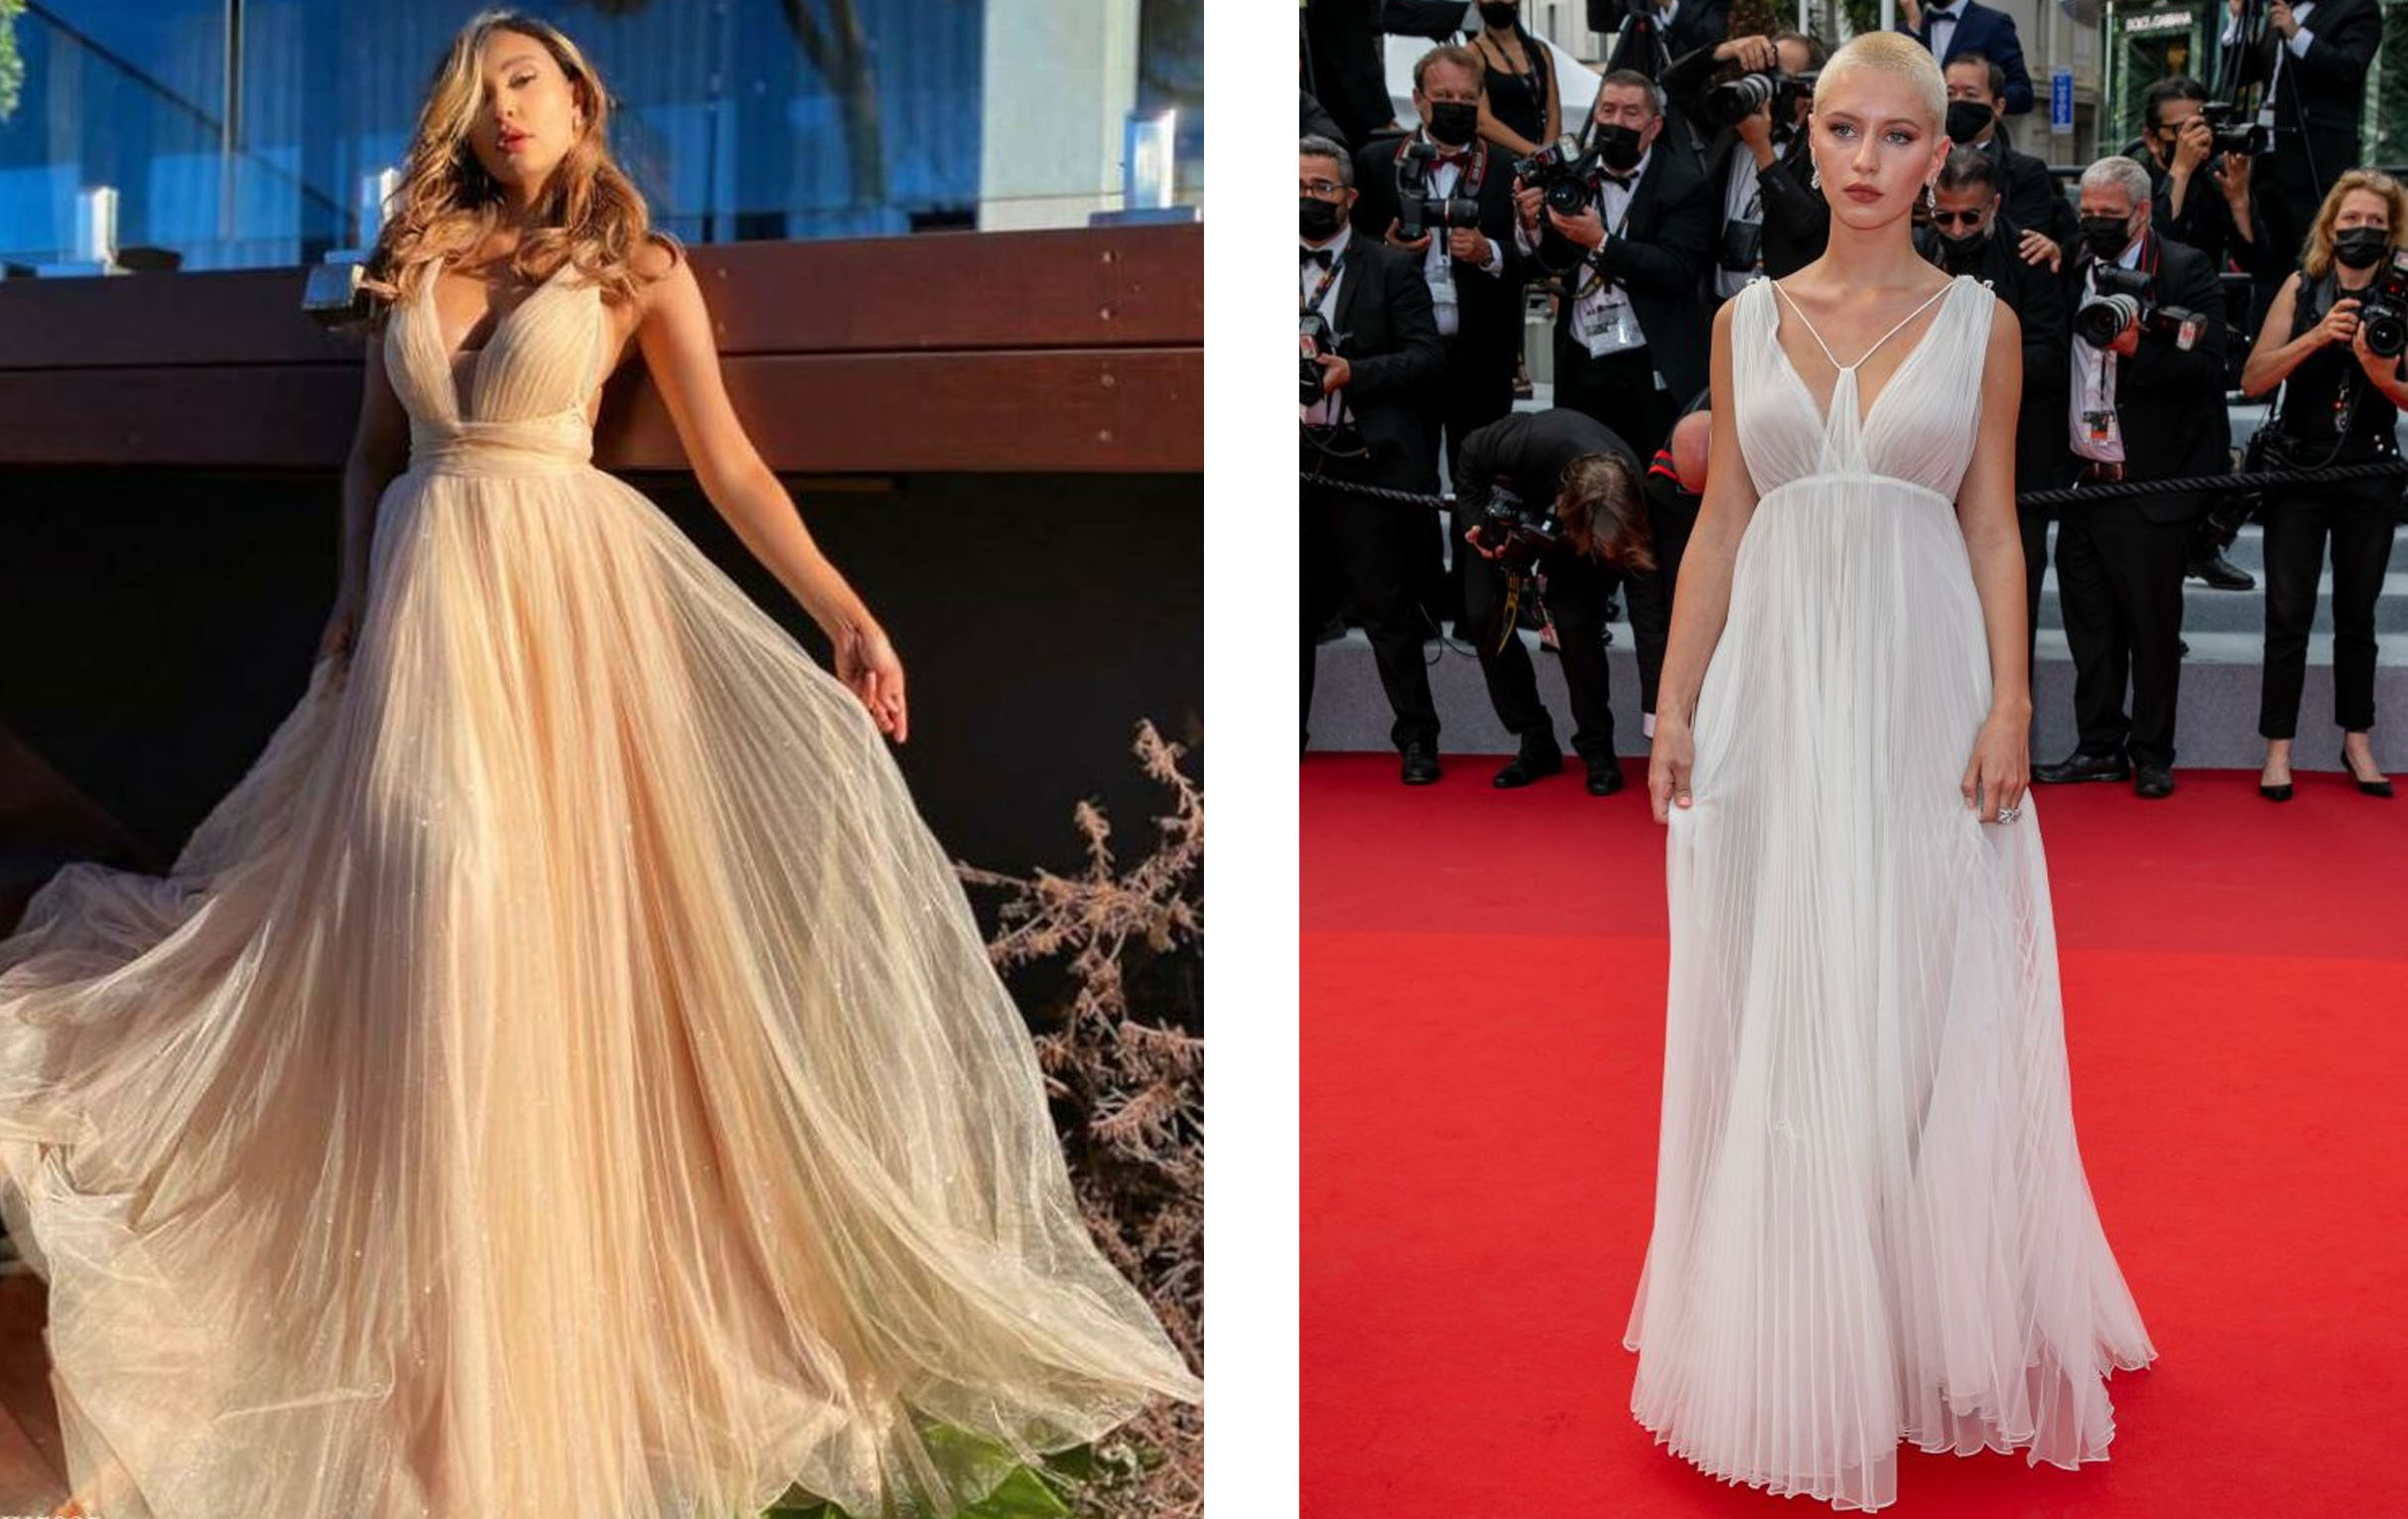 2021 Cannes Red Carpet Online Australia at Fashionably Yours: Jadore's Layla jx5035 vs Iris Law in Dior